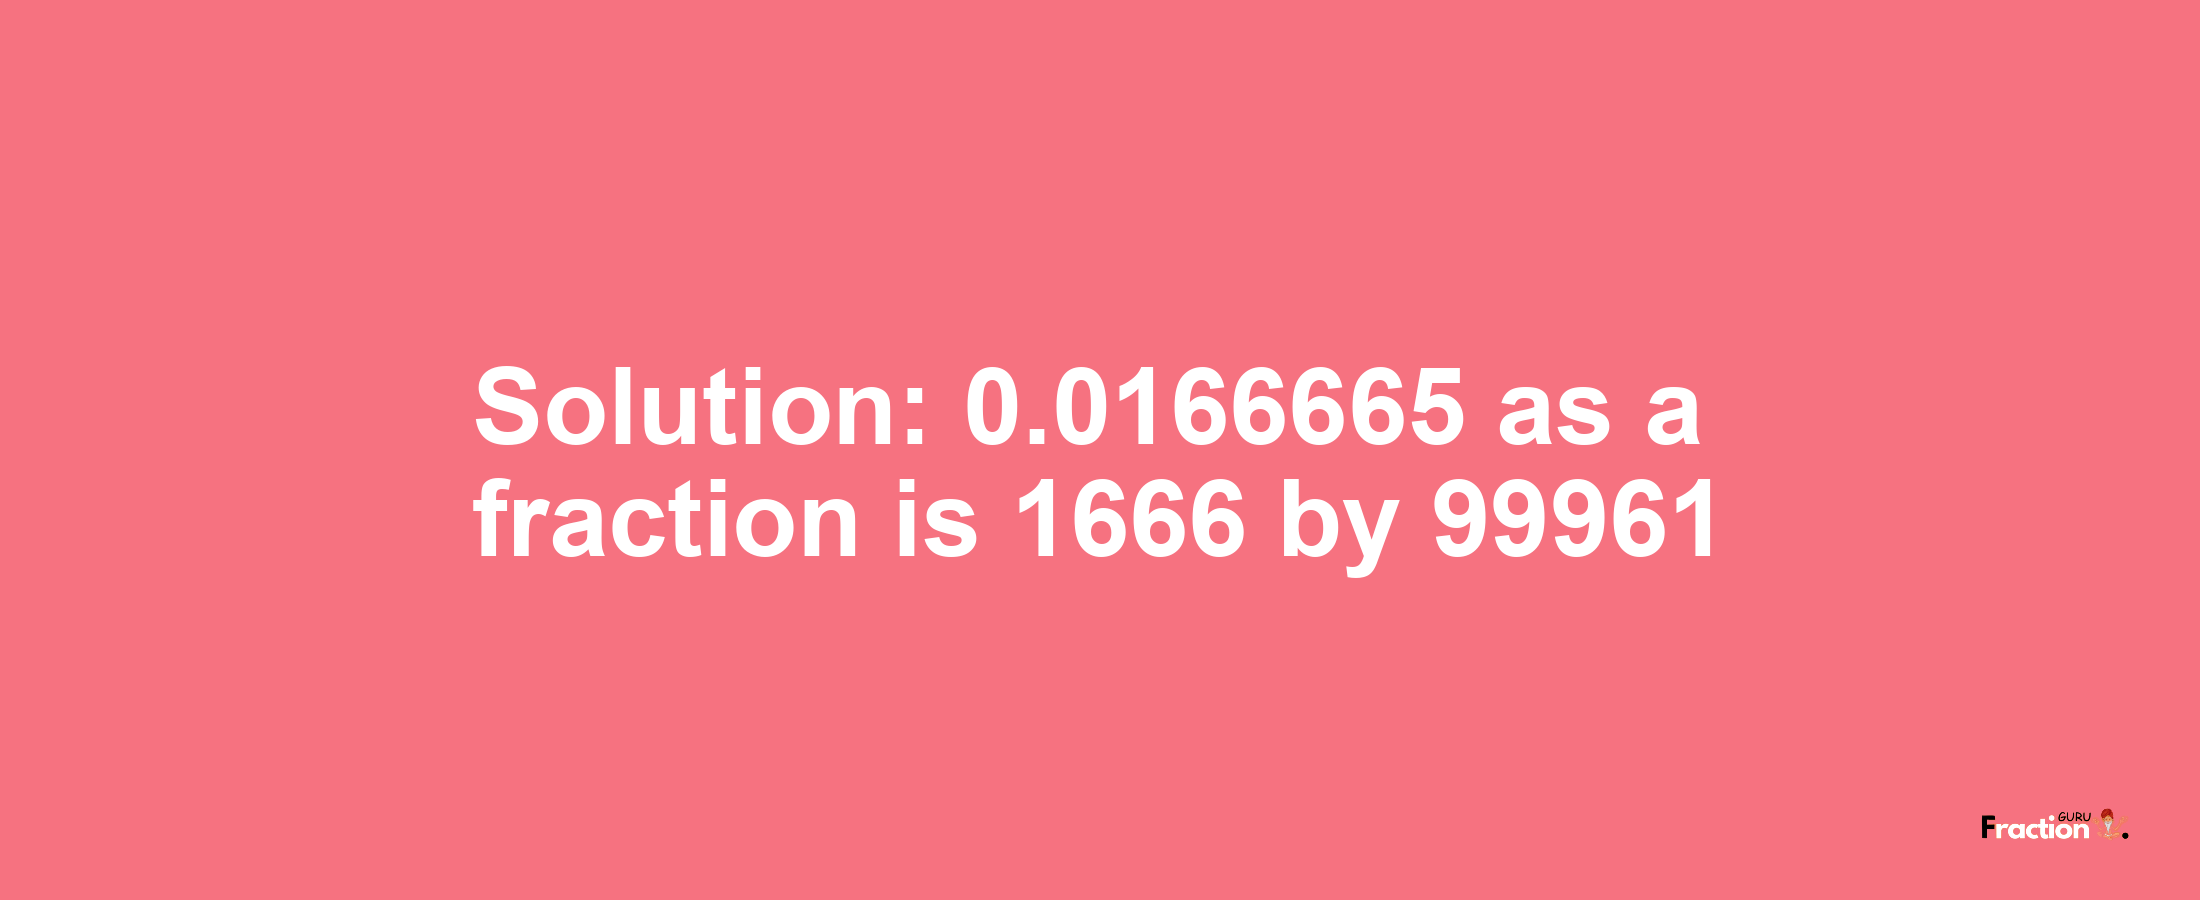 Solution:0.0166665 as a fraction is 1666/99961